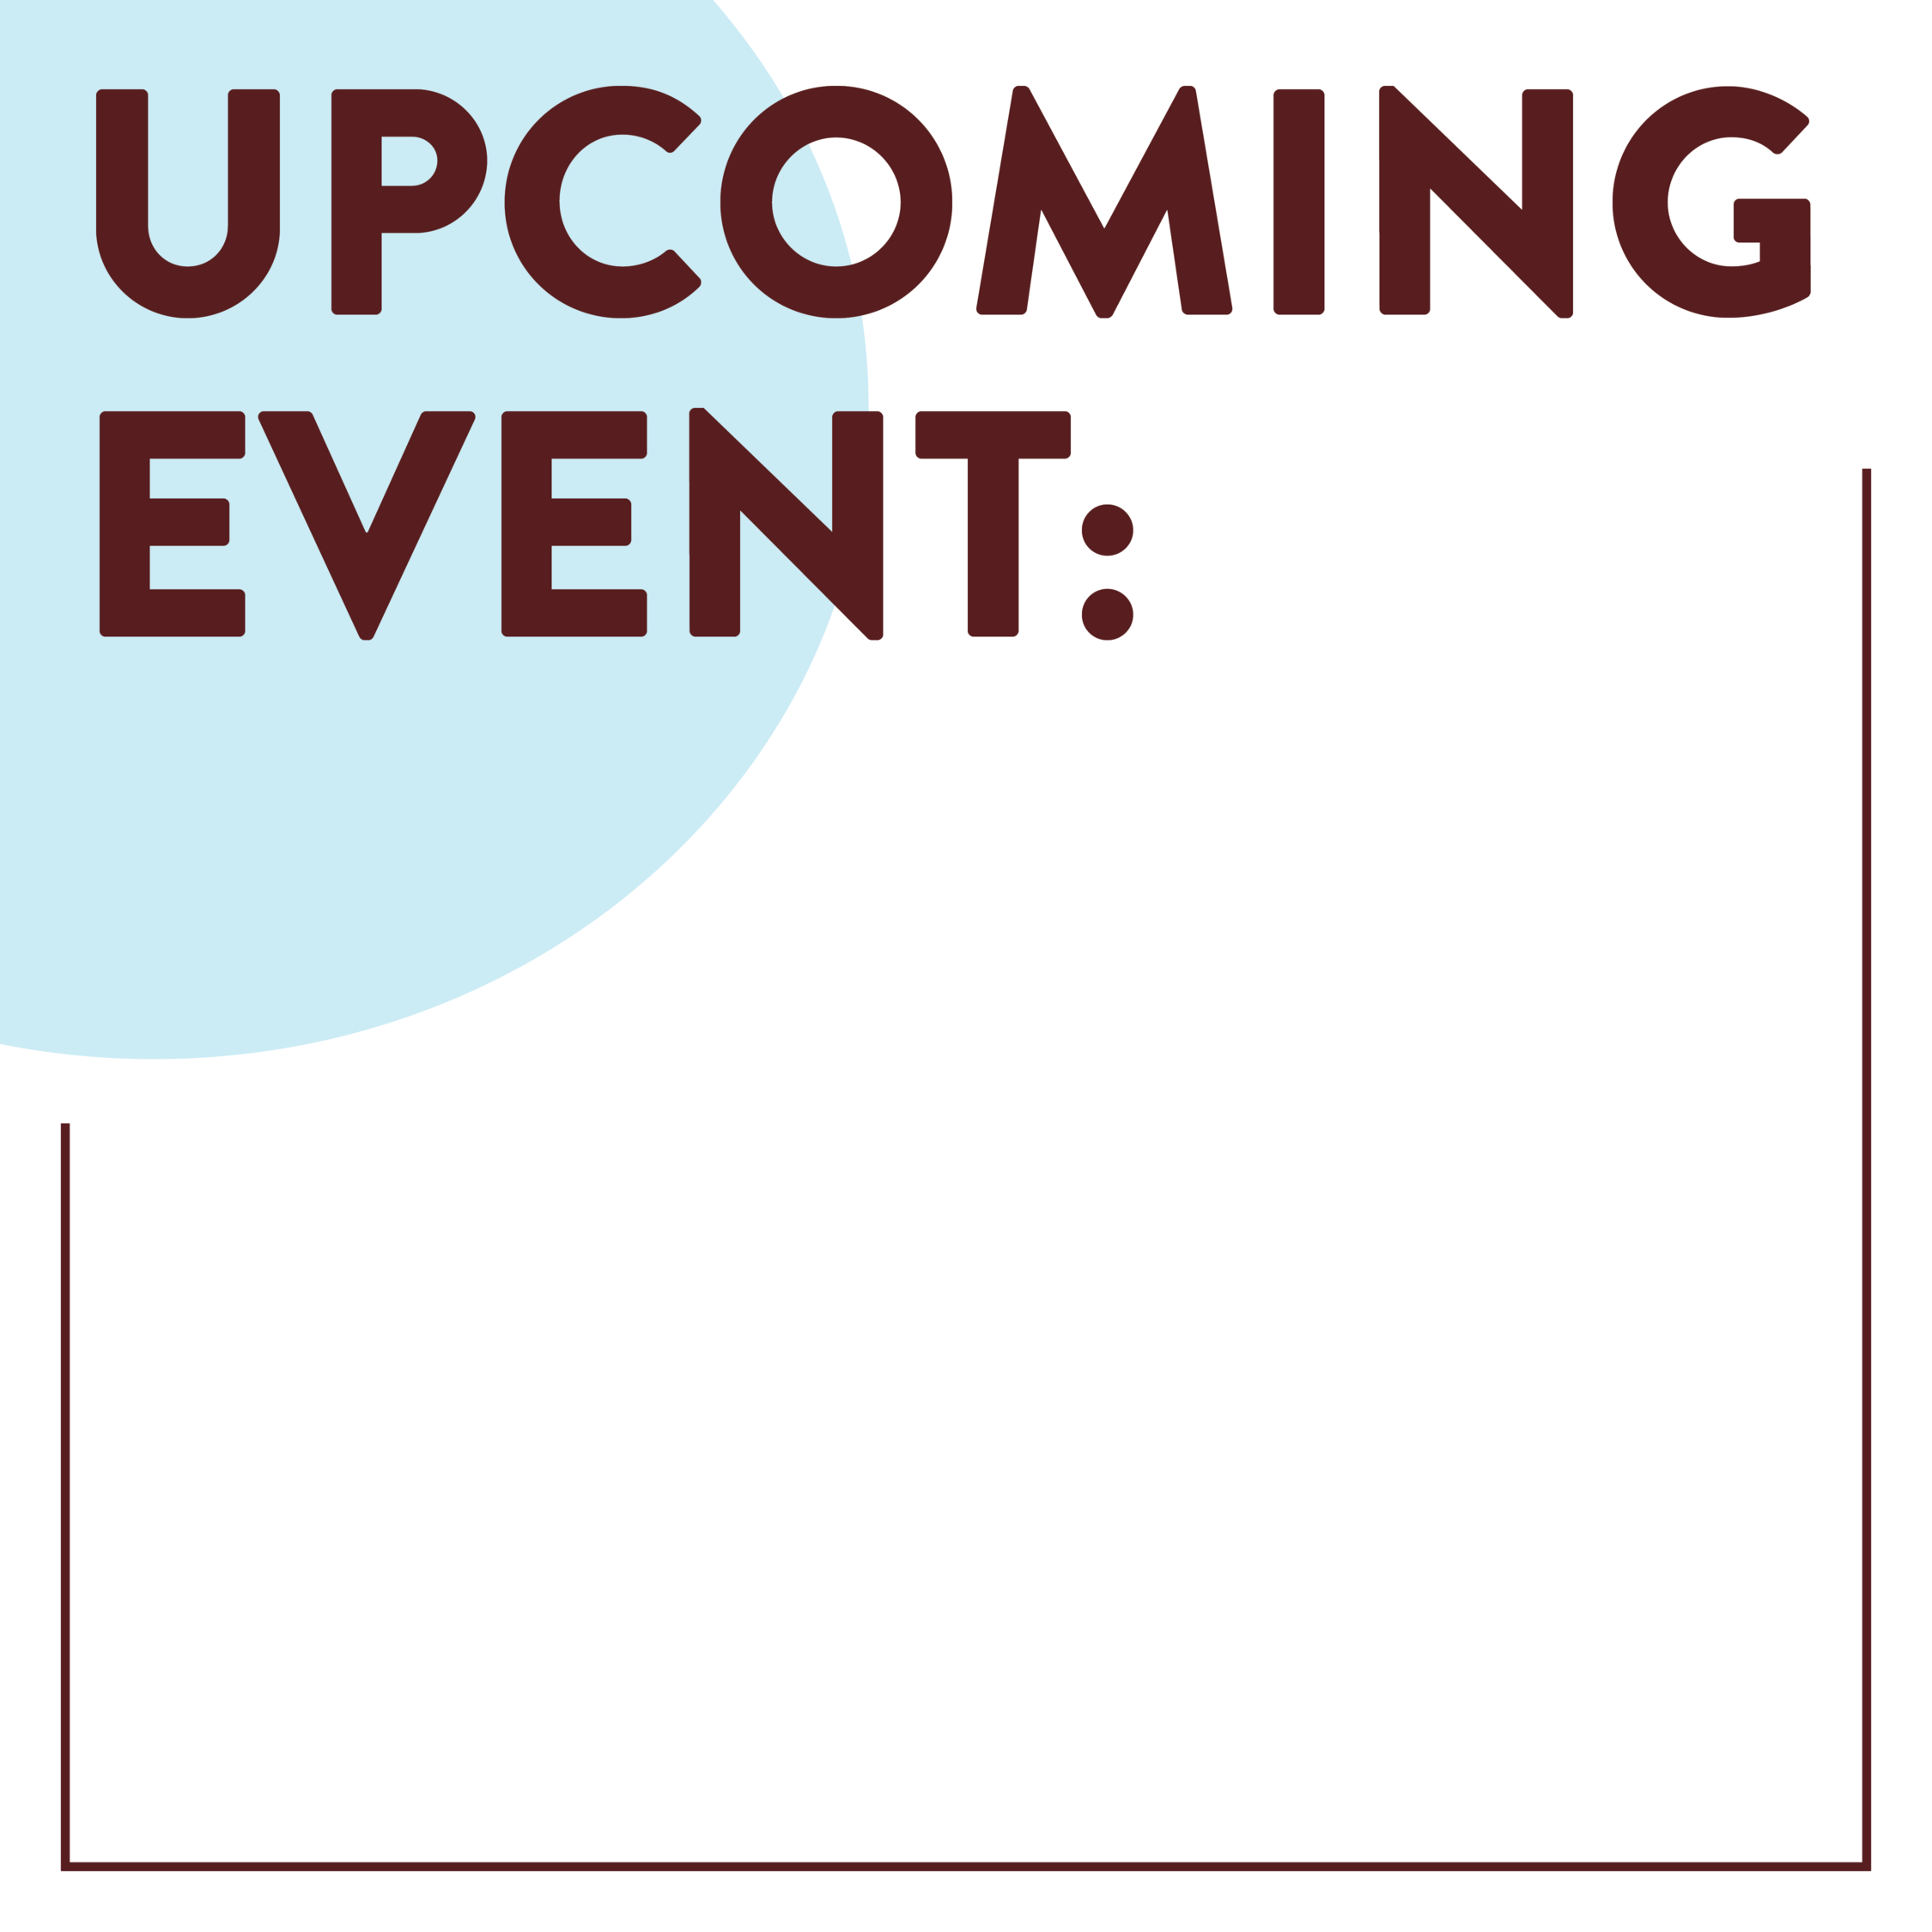 "UPCOMING EVENT" written in bold text on top of a blue circle